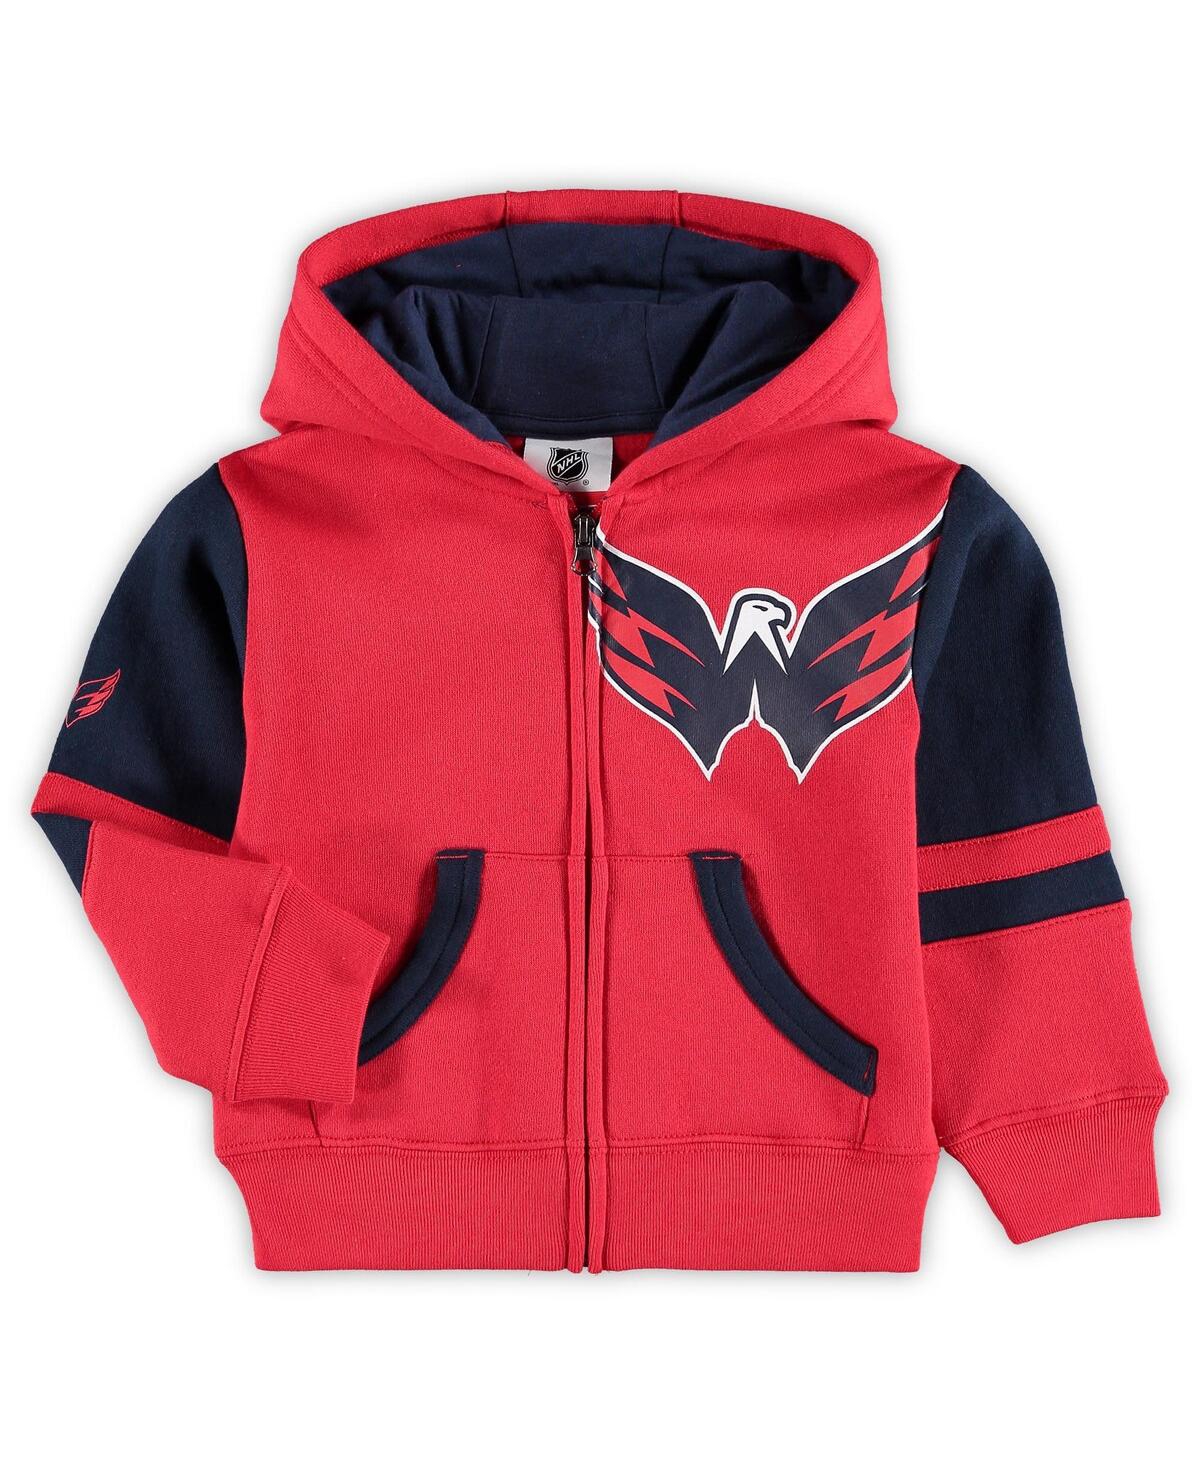 OUTERSTUFF BOYS AND GIRLS TODDLER RED WASHINGTON CAPITALS FACEOFF FLEECE FULL-ZIP HOODIE JACKET